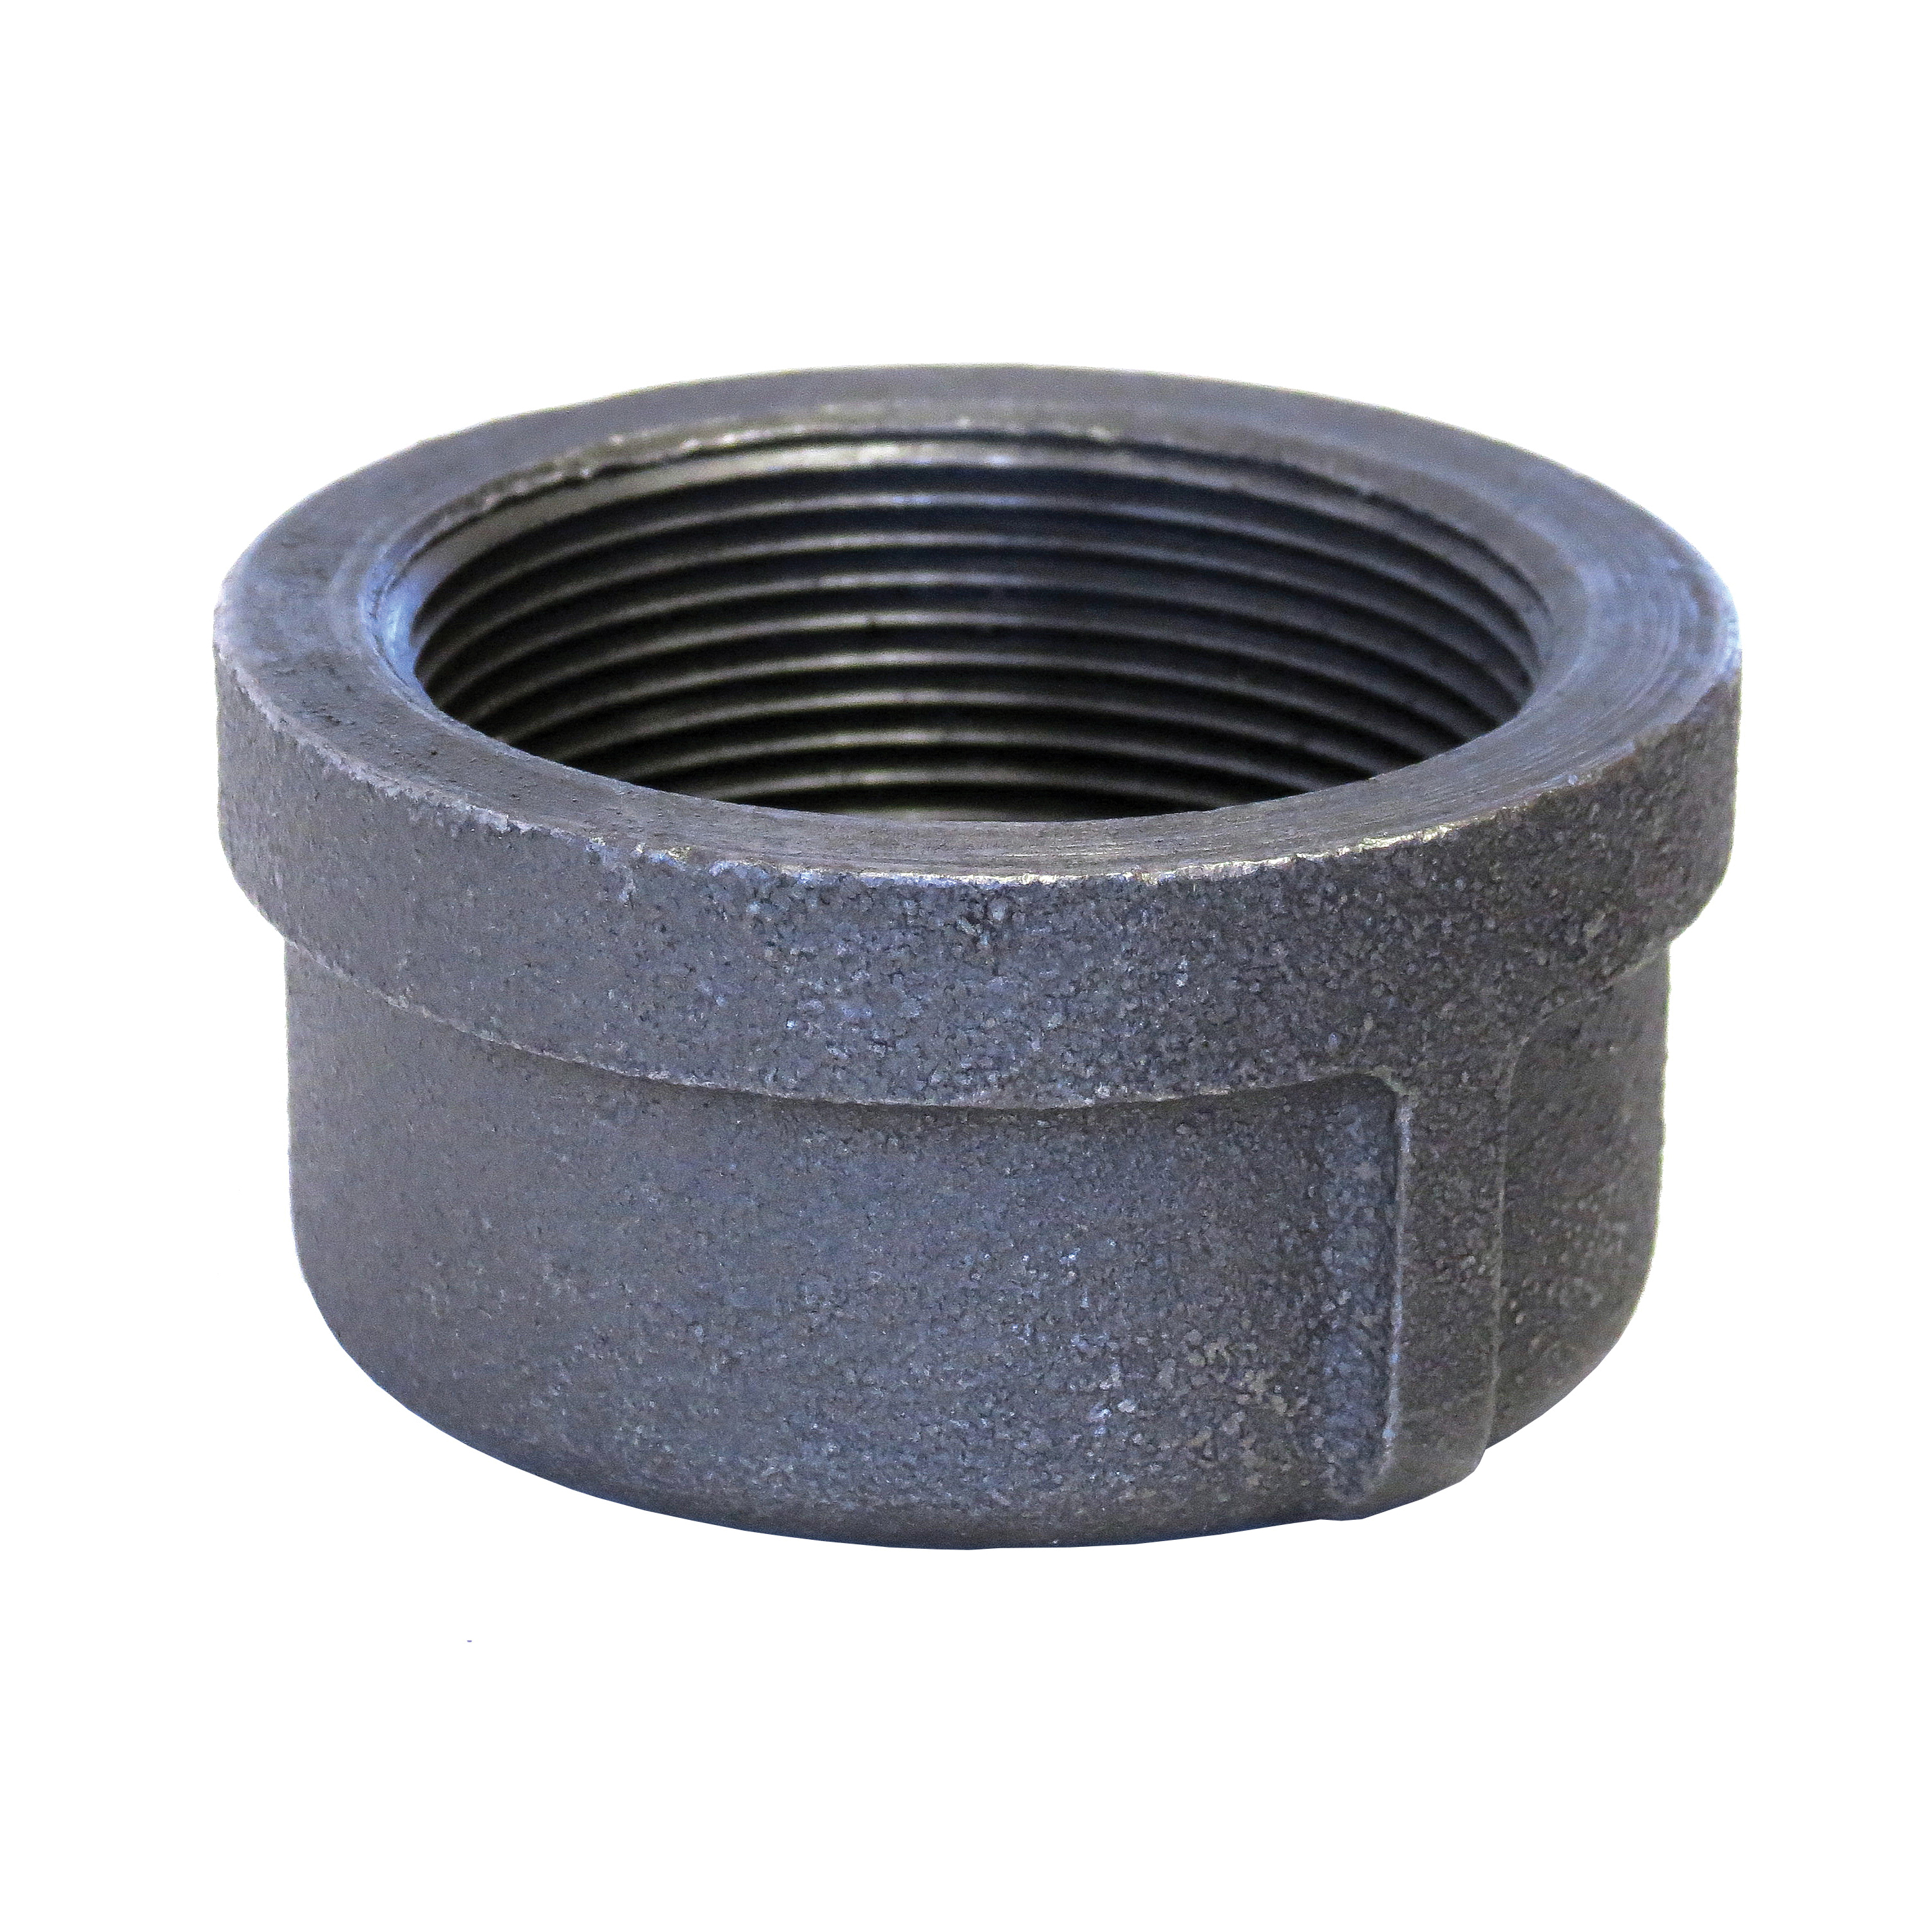 Anvil® 0319900528 FIG 1124 Standard Pipe Cap, 1/2 in Nominal, FNPT End Style, 150 lb, Malleable Iron, Galvanized, Domestic